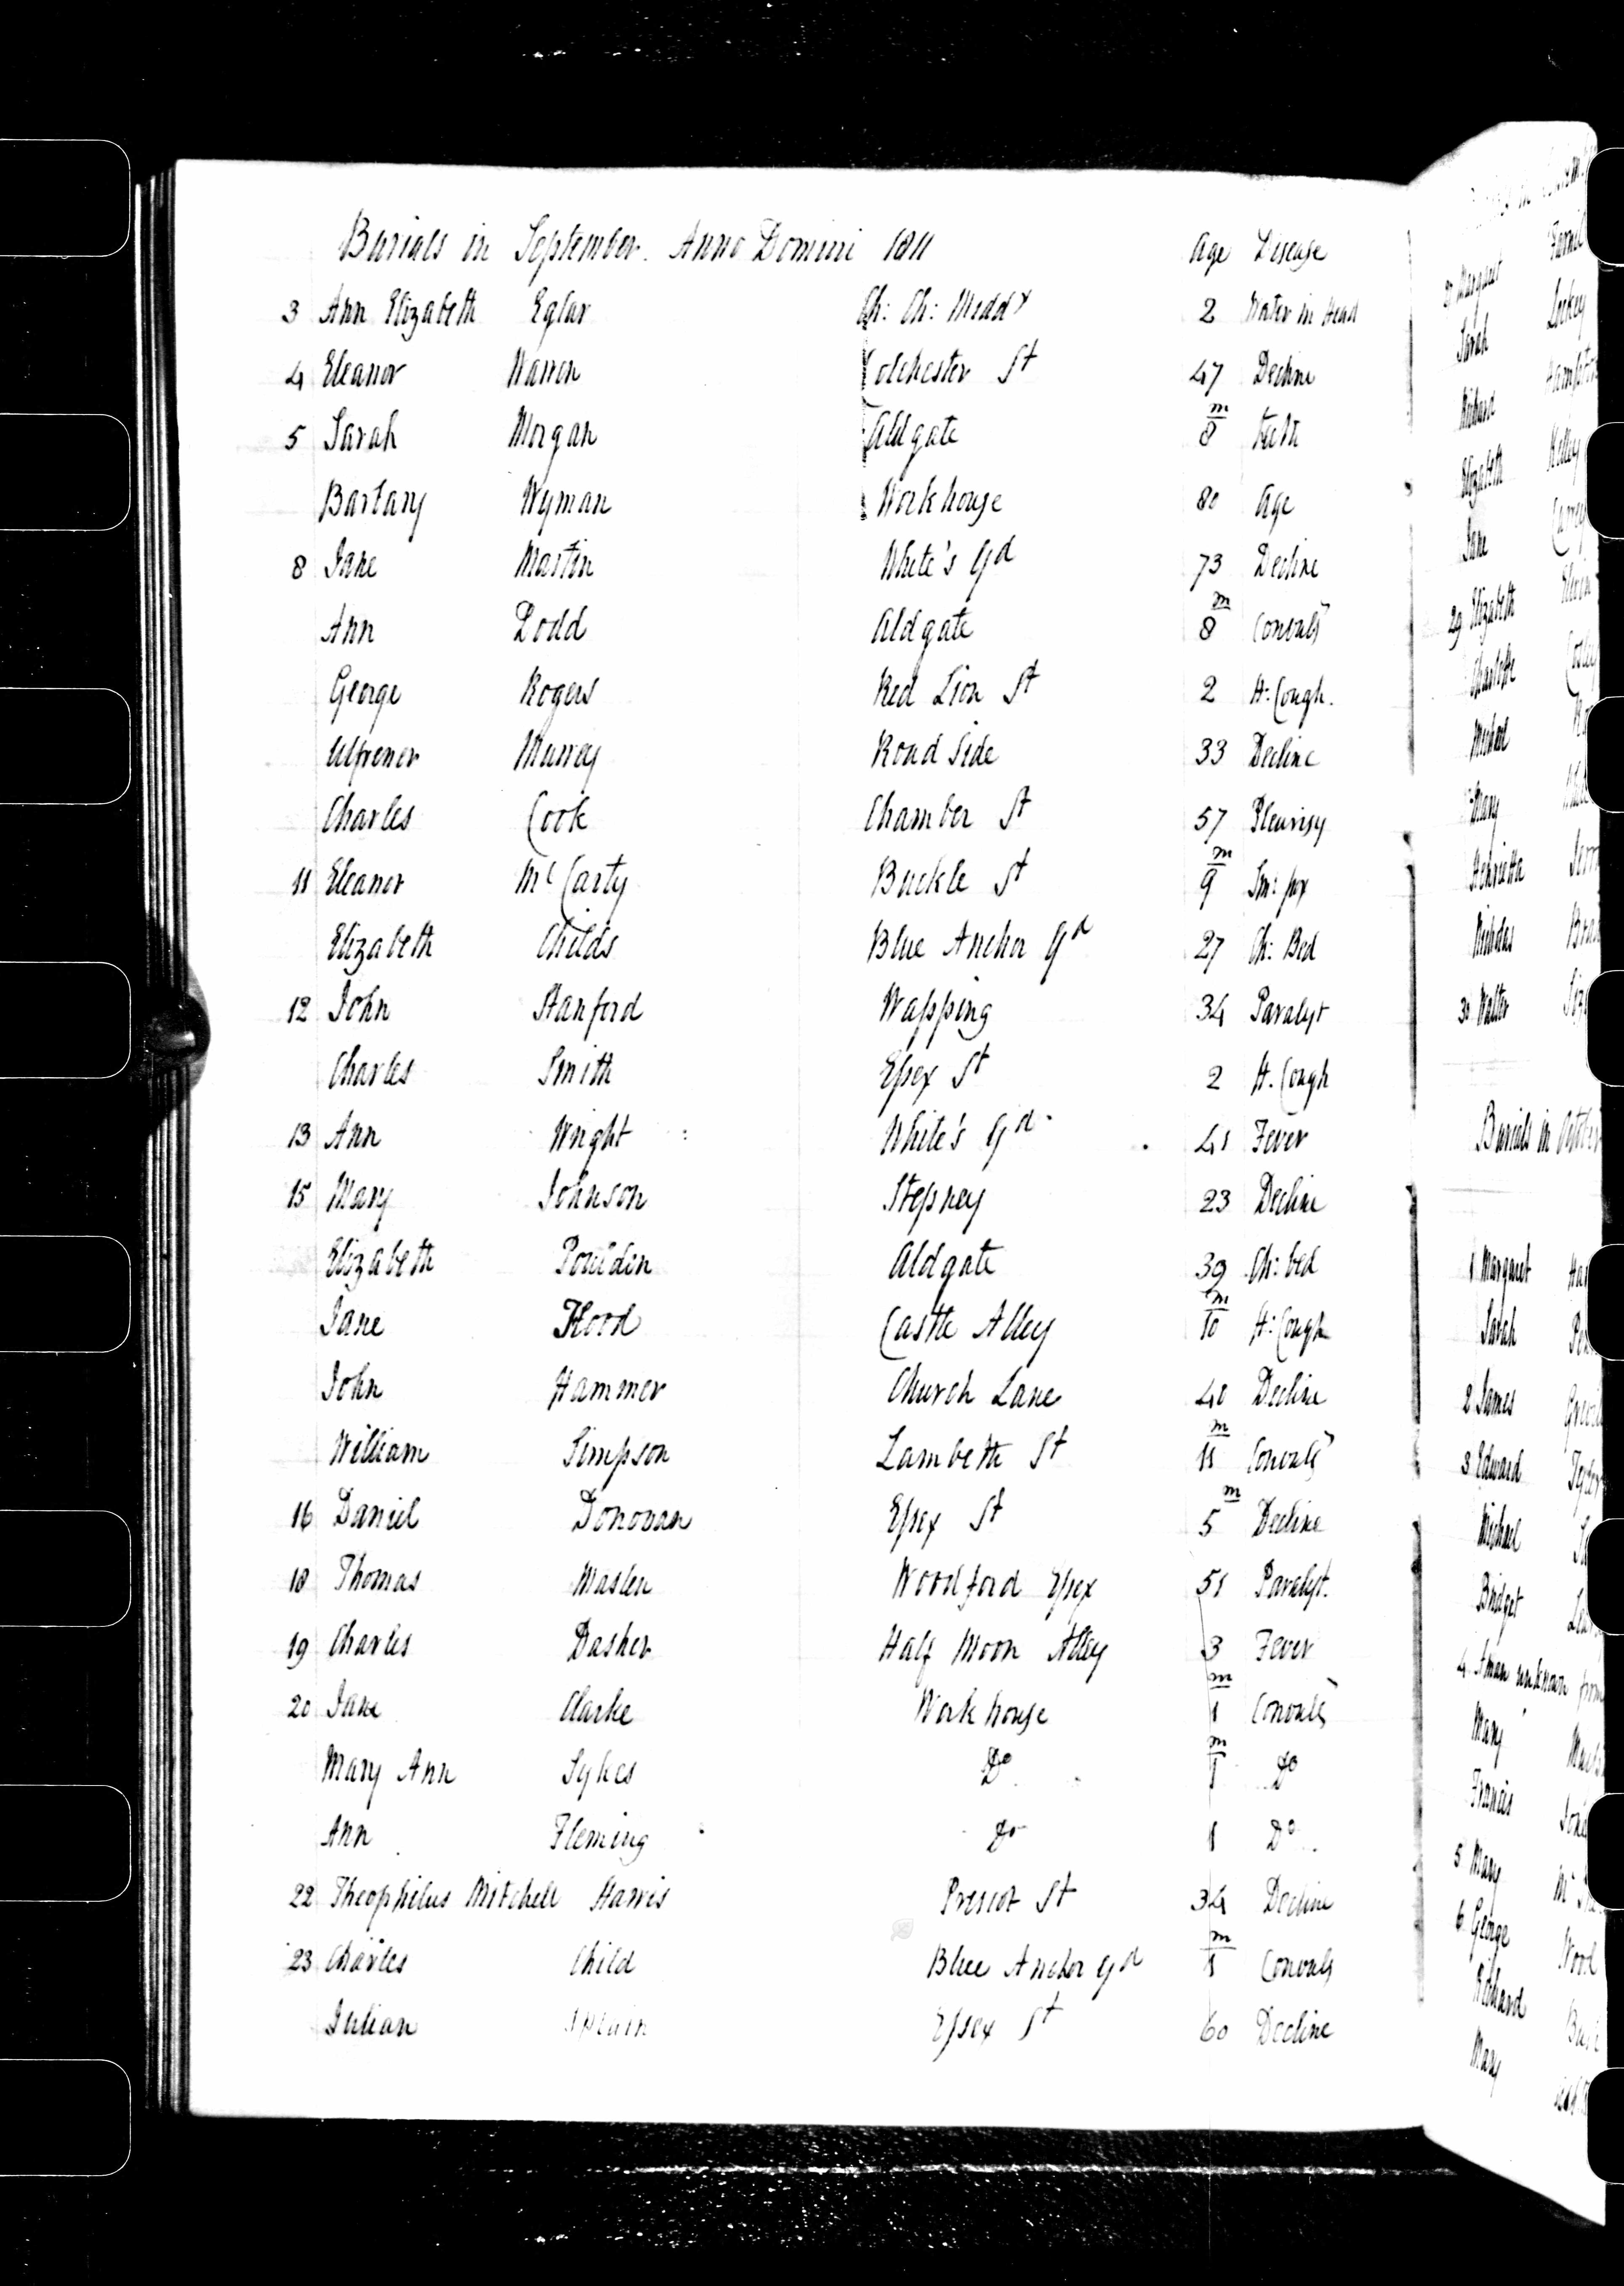 1811 burial, Theophillus Mitchell Harris, 22nd September. He was 34 years old and living at Prescot Street - the same place as on his baptism record.